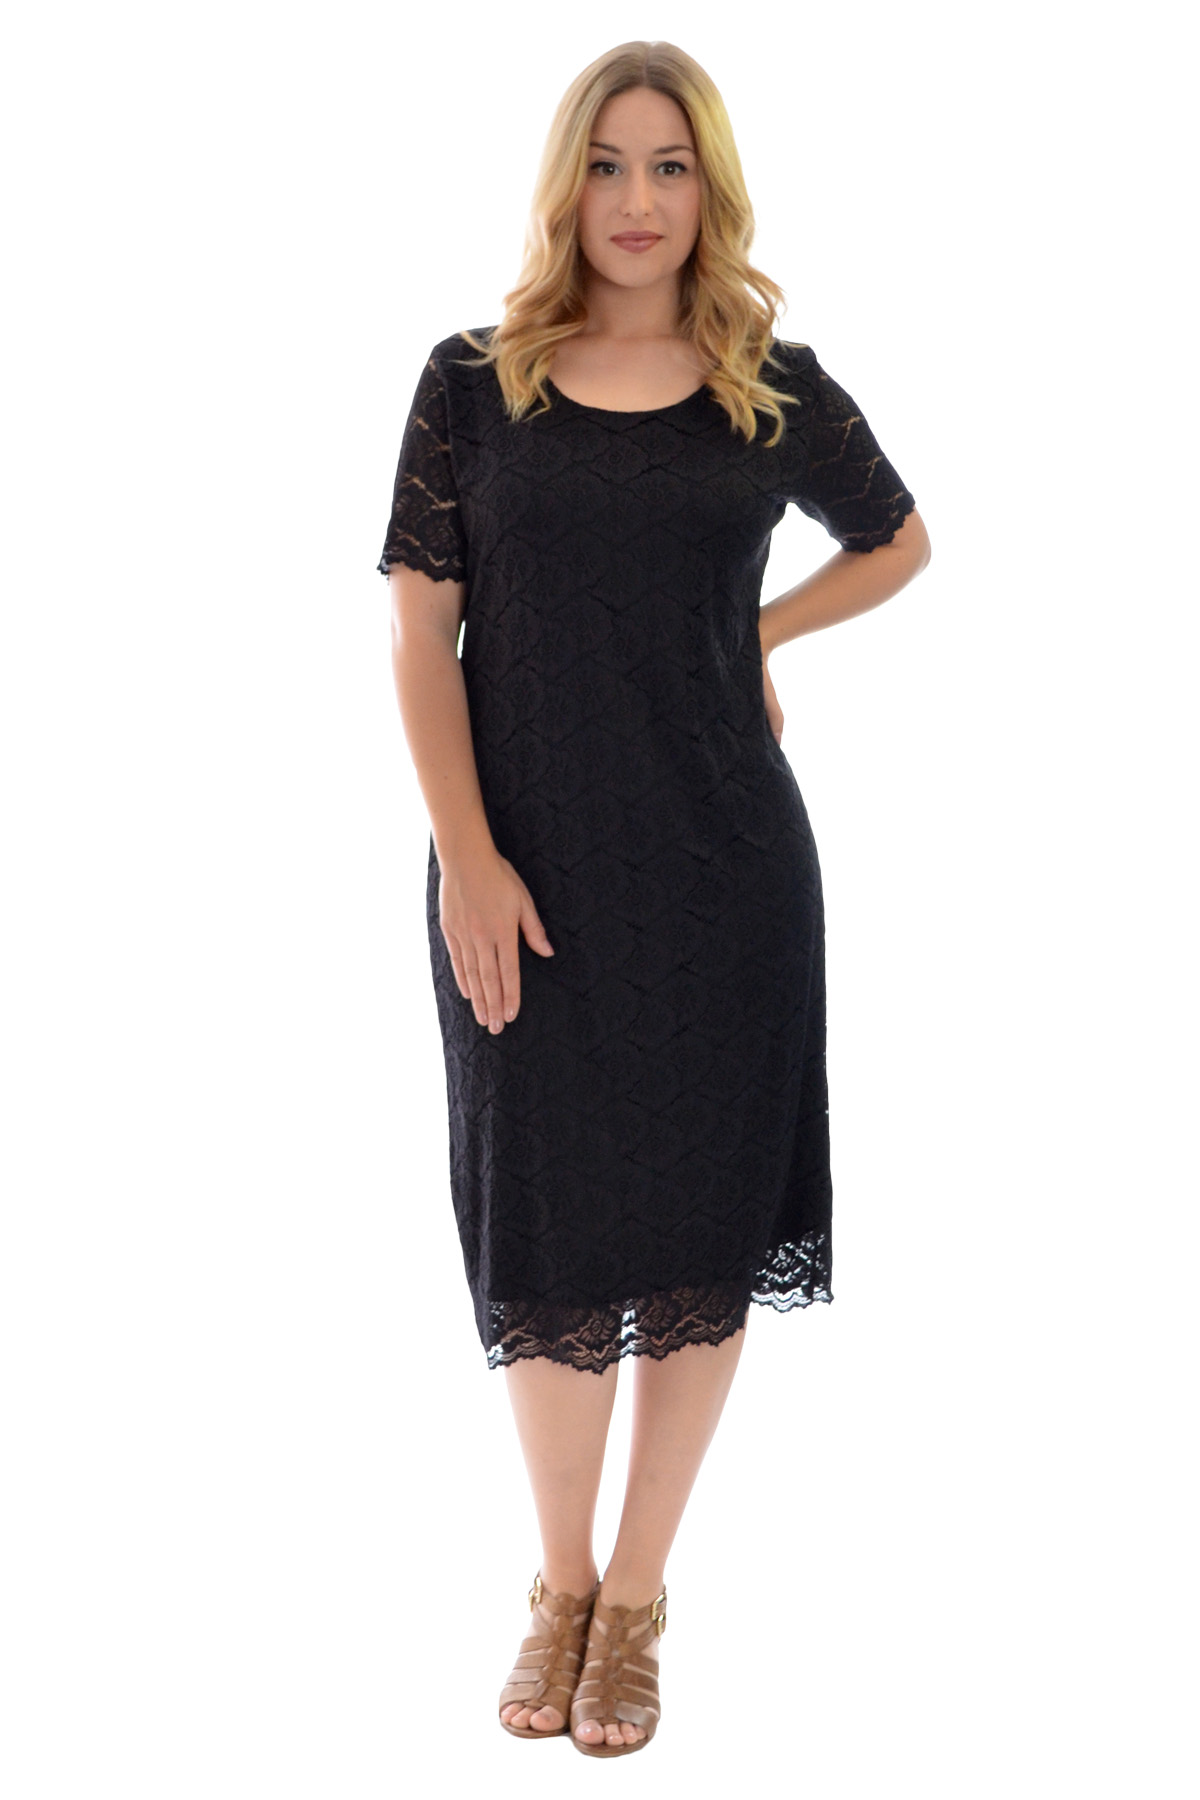 New Womens Plus Size Dress Ladies Midi Tunic Floral Lace Short Sleeves ...